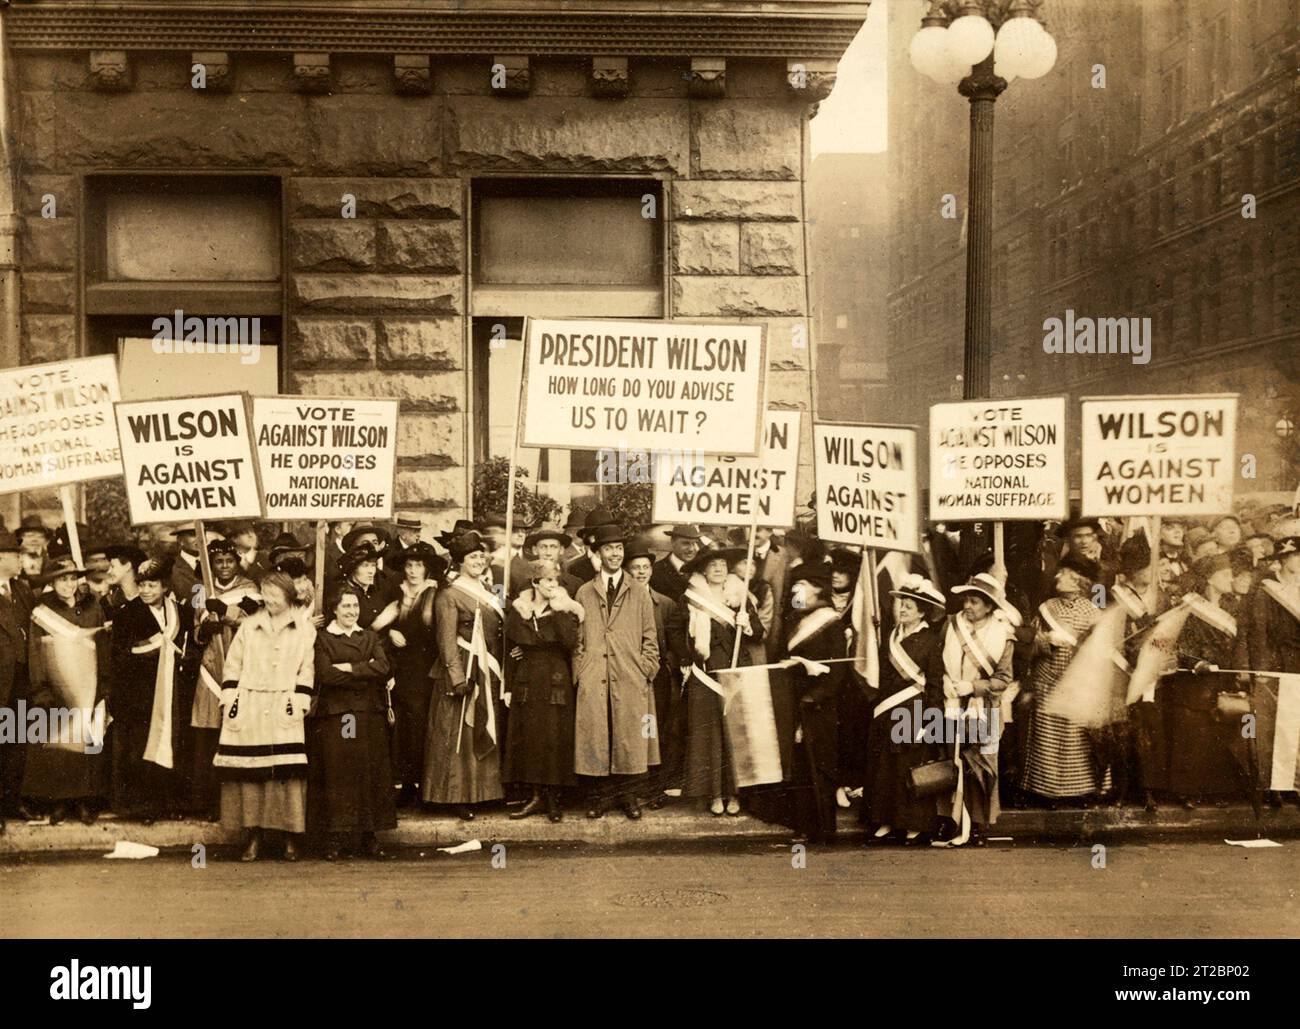 Suffragists demonstrating against U.S. President Woodrow Wilson, Chicago, Illinois, USA, Burke & Atwell, October 1916 Stock Photo